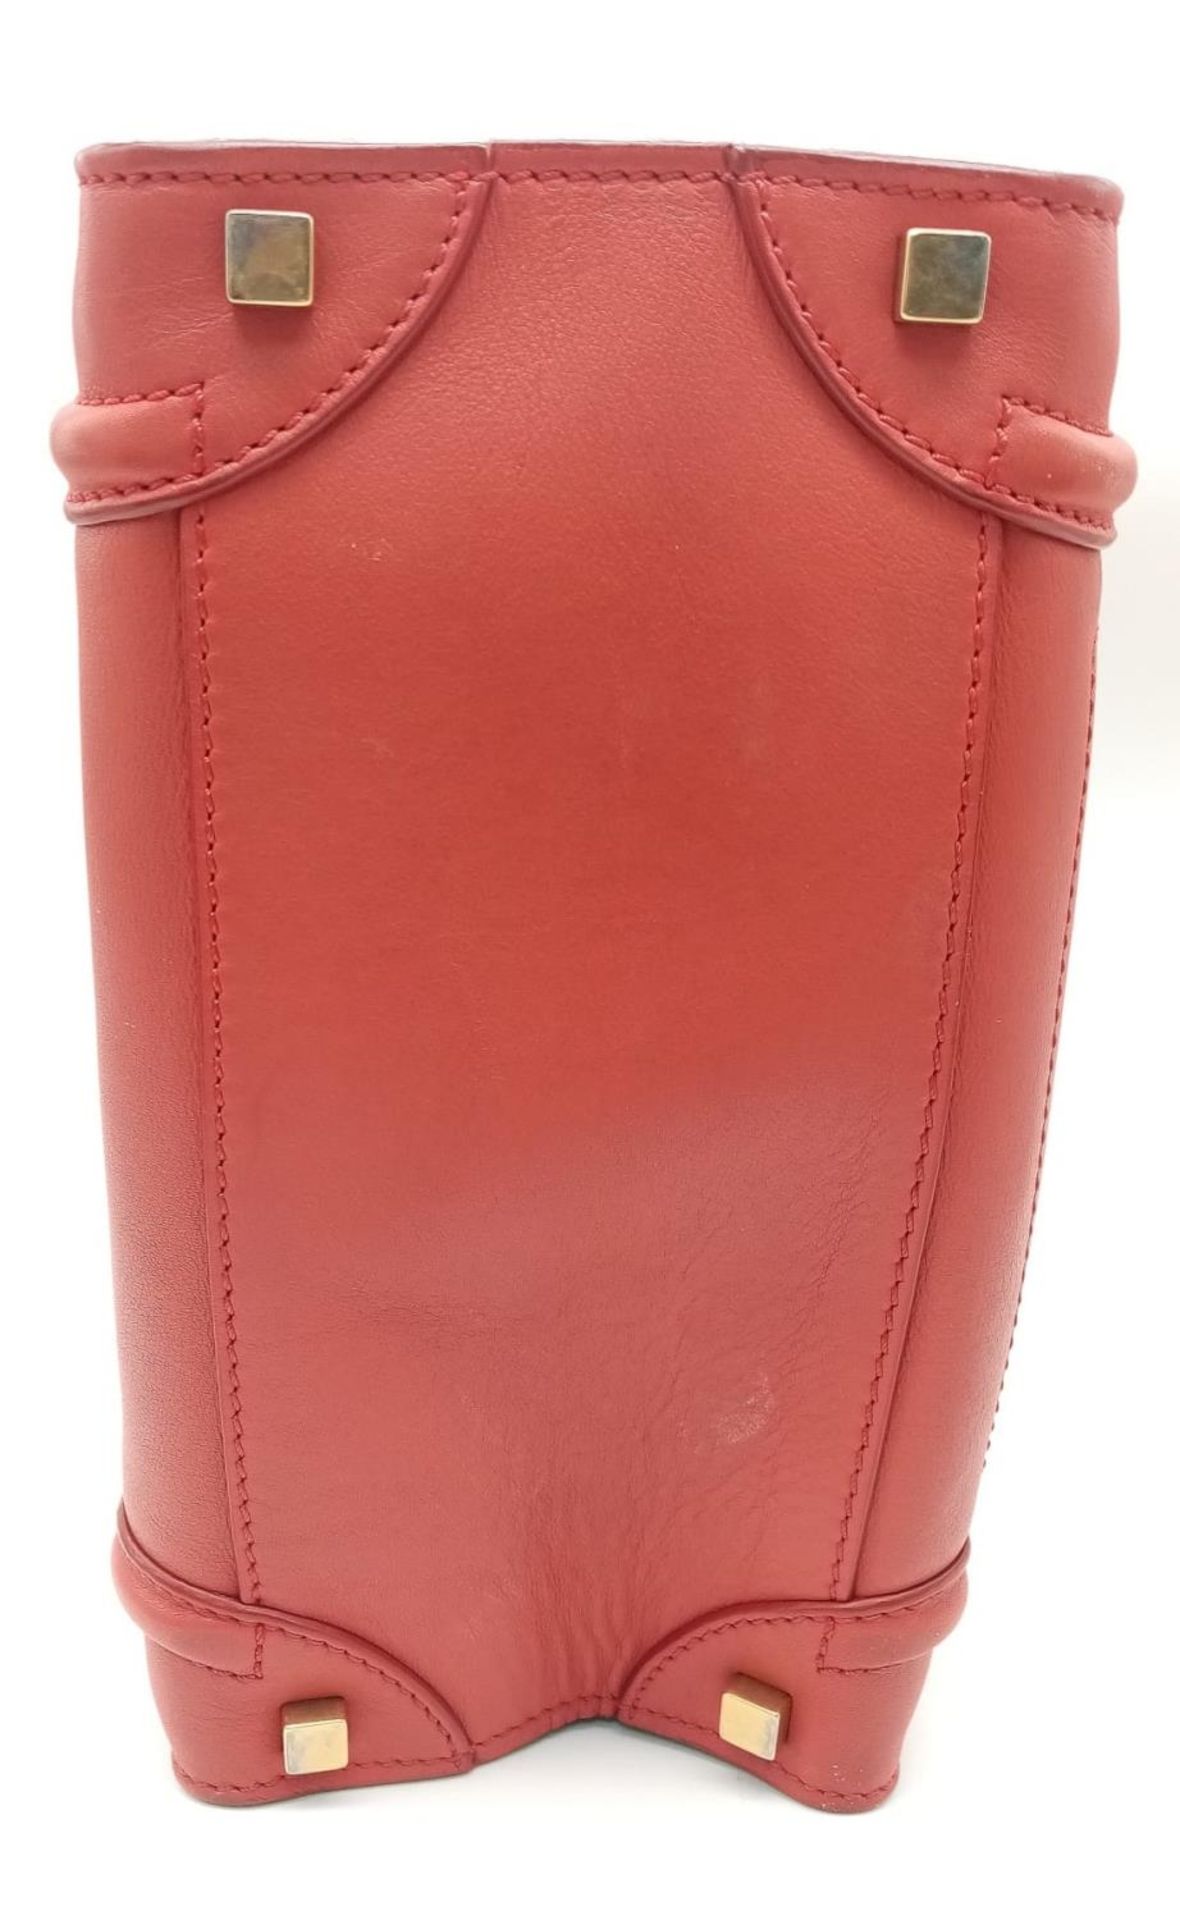 A Celine Coral Luggage Bag. Leather exterior with two rolled leather handles, a zipped pocket to the - Image 5 of 12